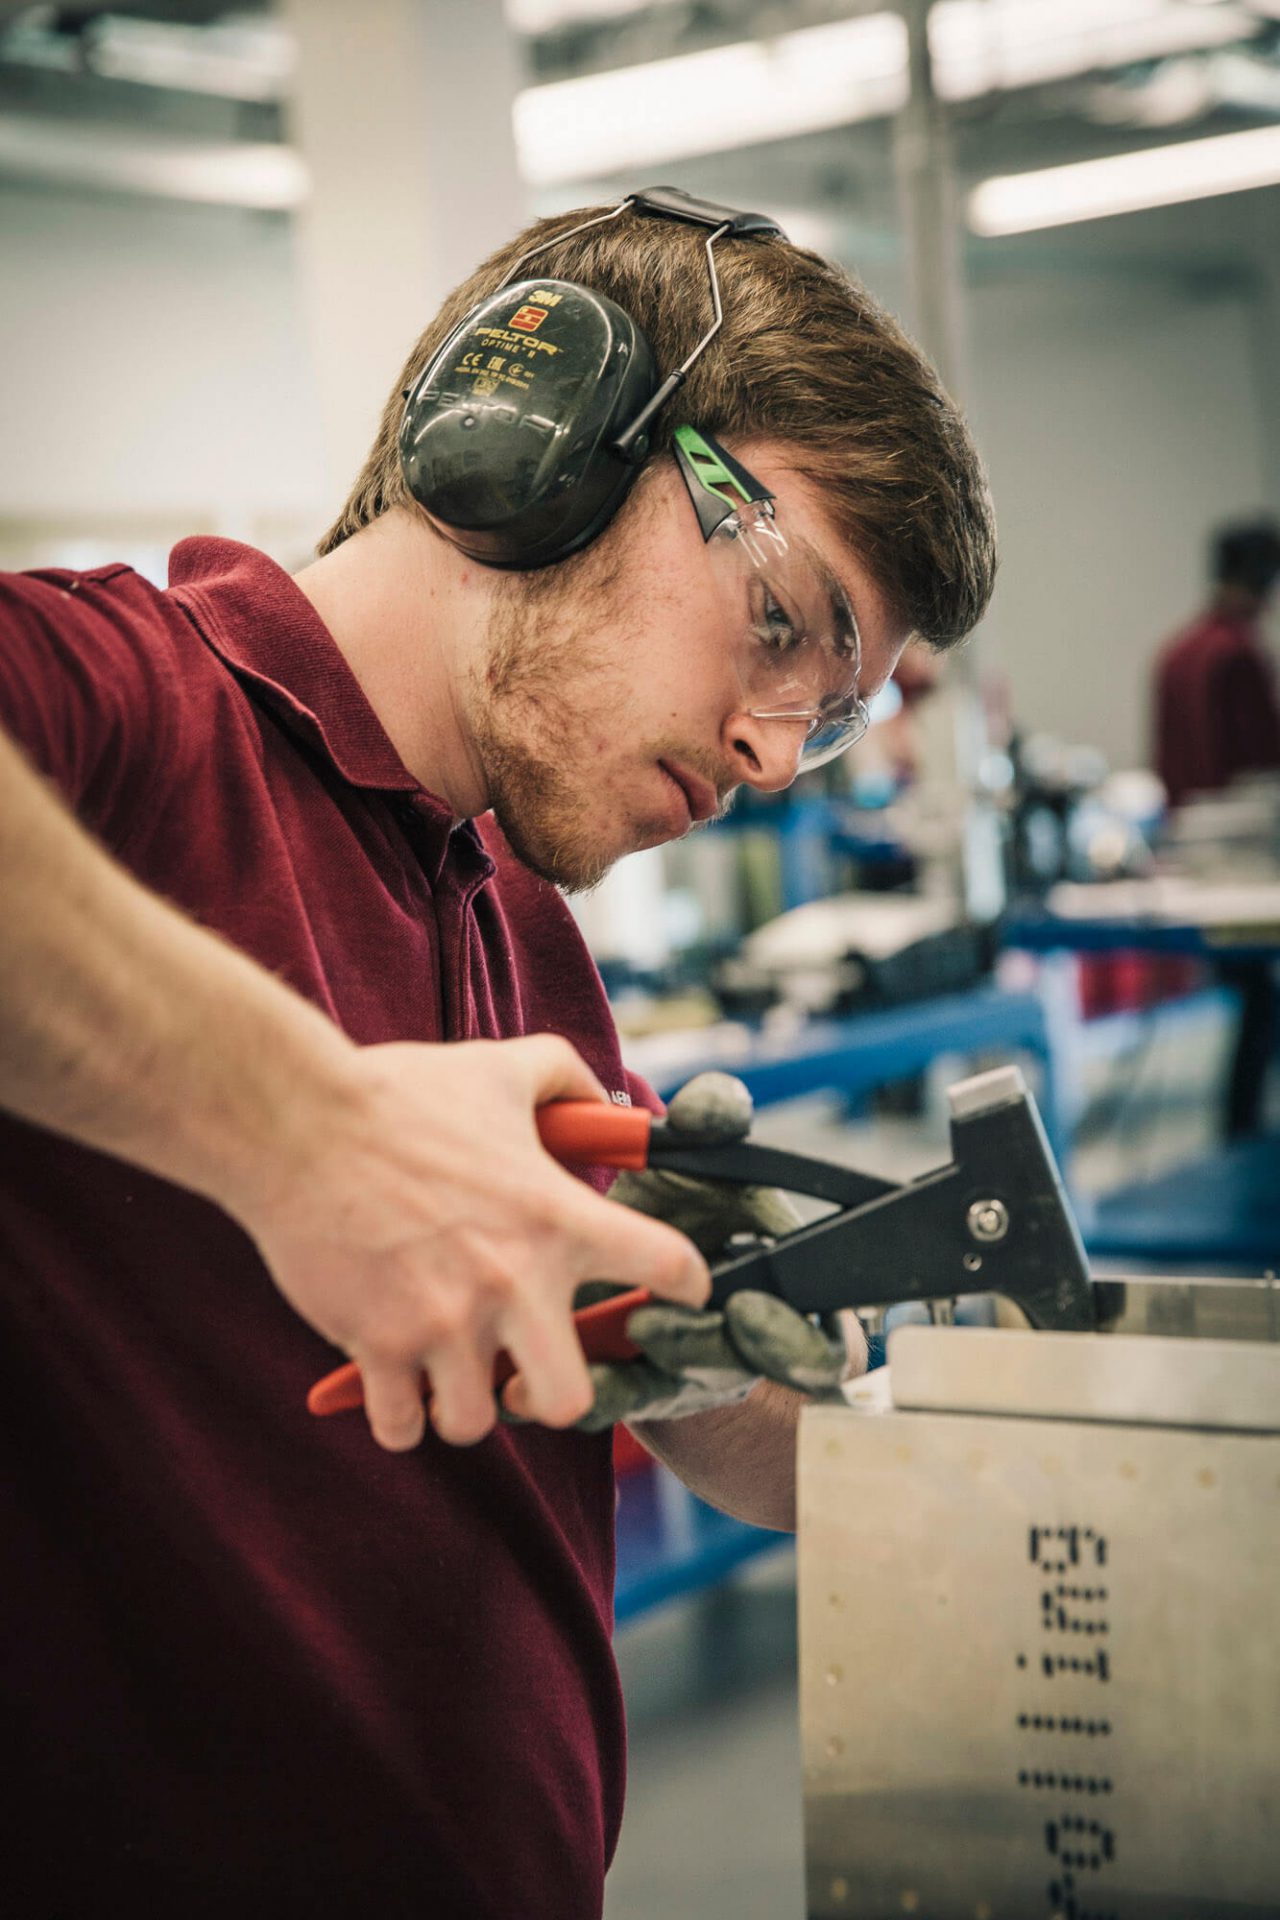 A GKN engineering student works with ear-defenders and goggles on